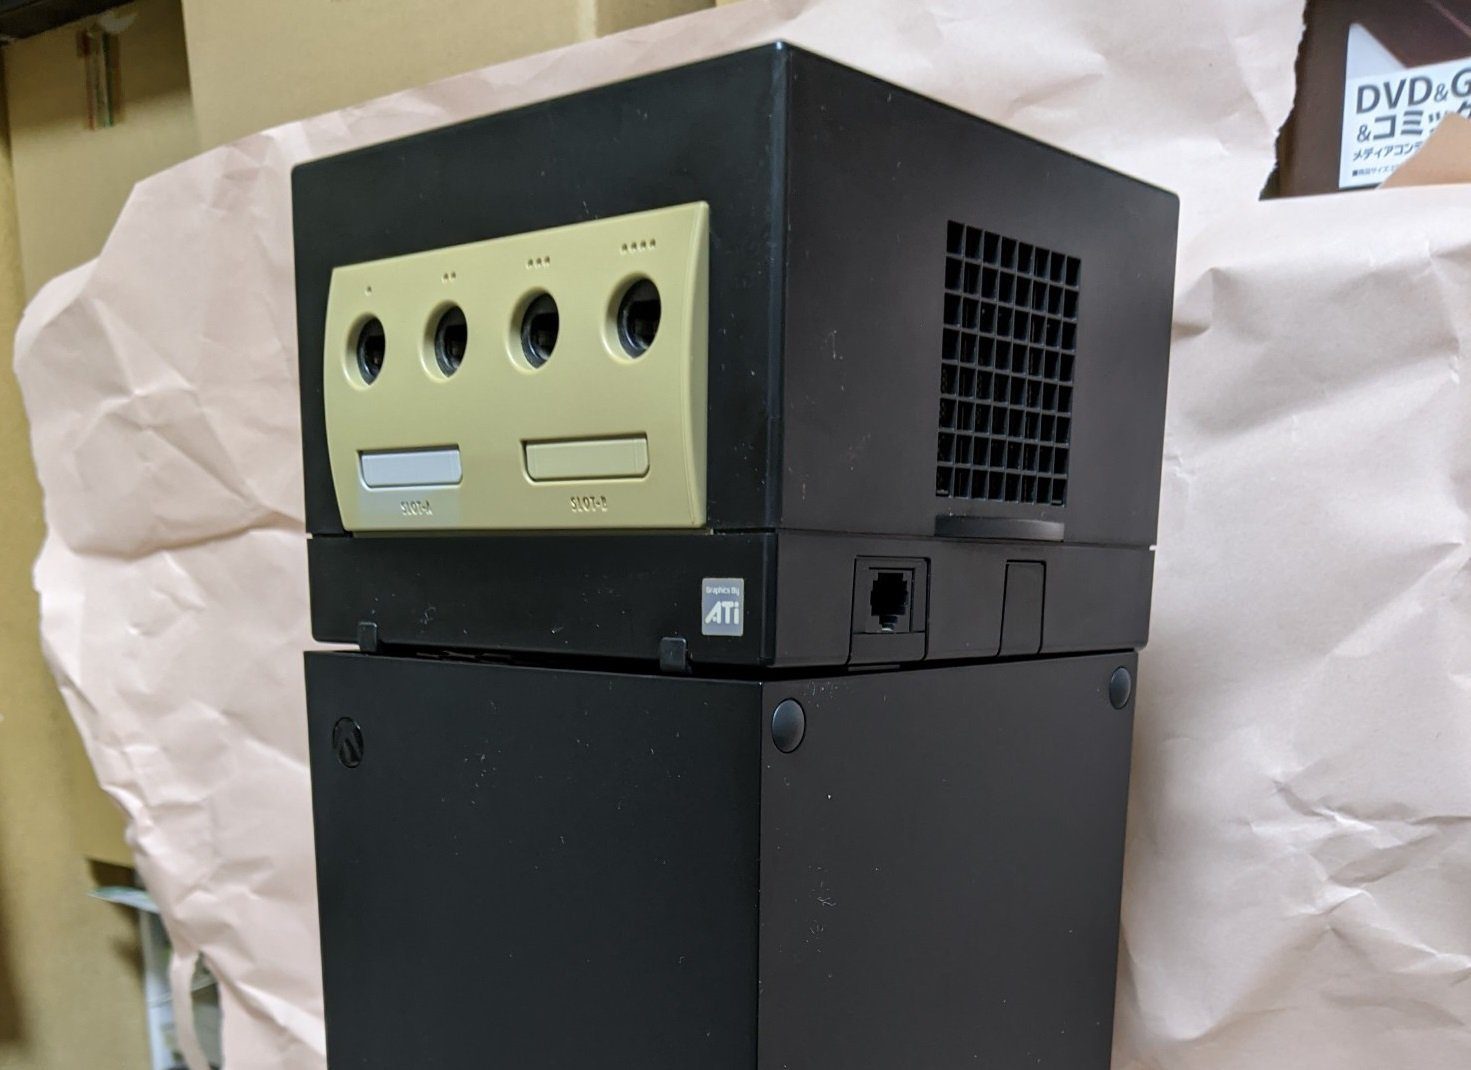 The Xbox Series X Can Perfectly Balance A Gamecube Destructoid